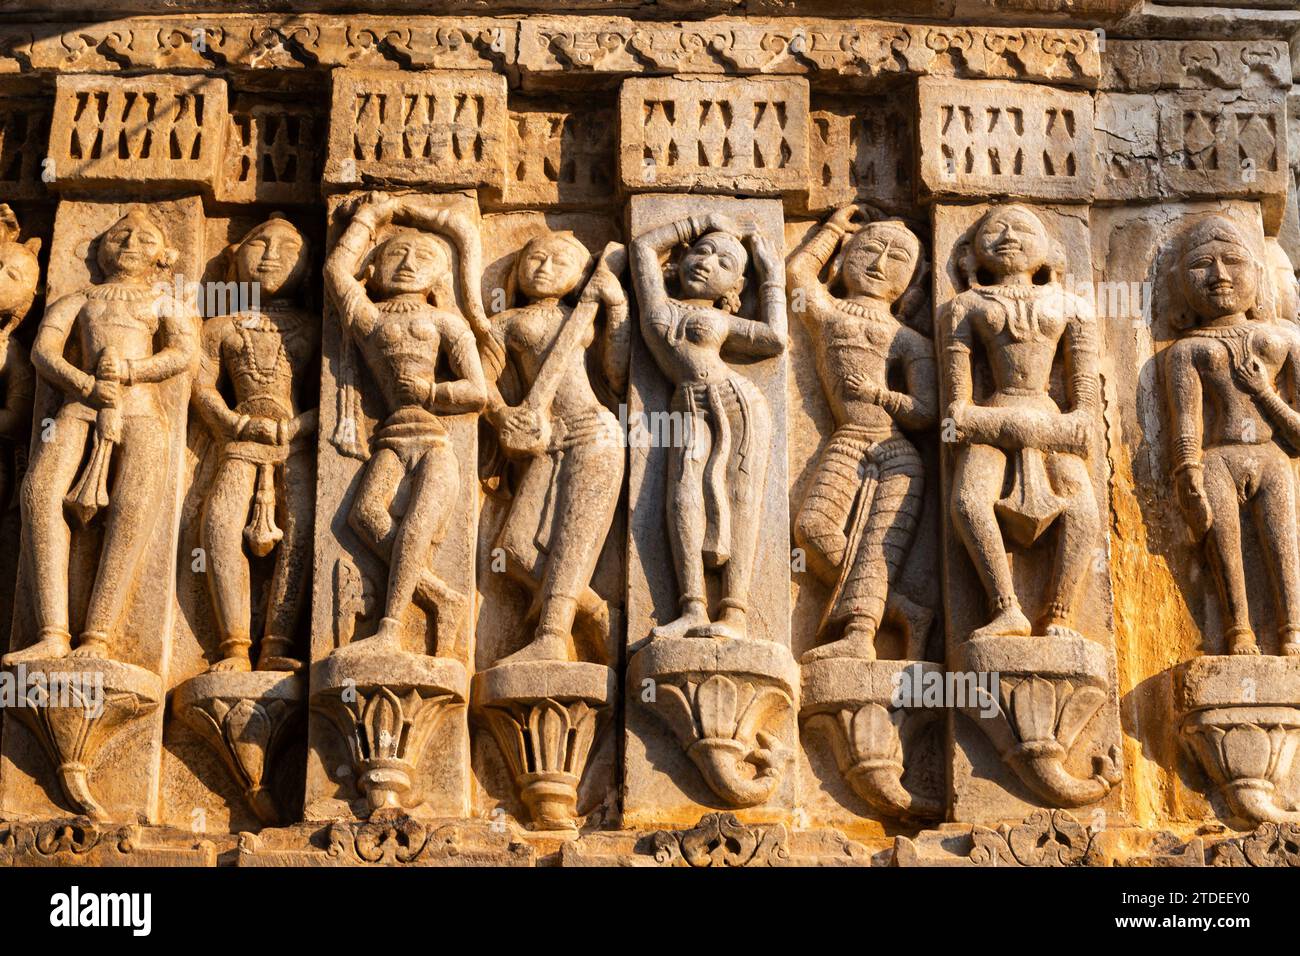 Sculptures of musicians and dancers on hindu holy temple wall at golden hour image is taken at Jagdish Temple udaipur rajasthan india. Stock Photo